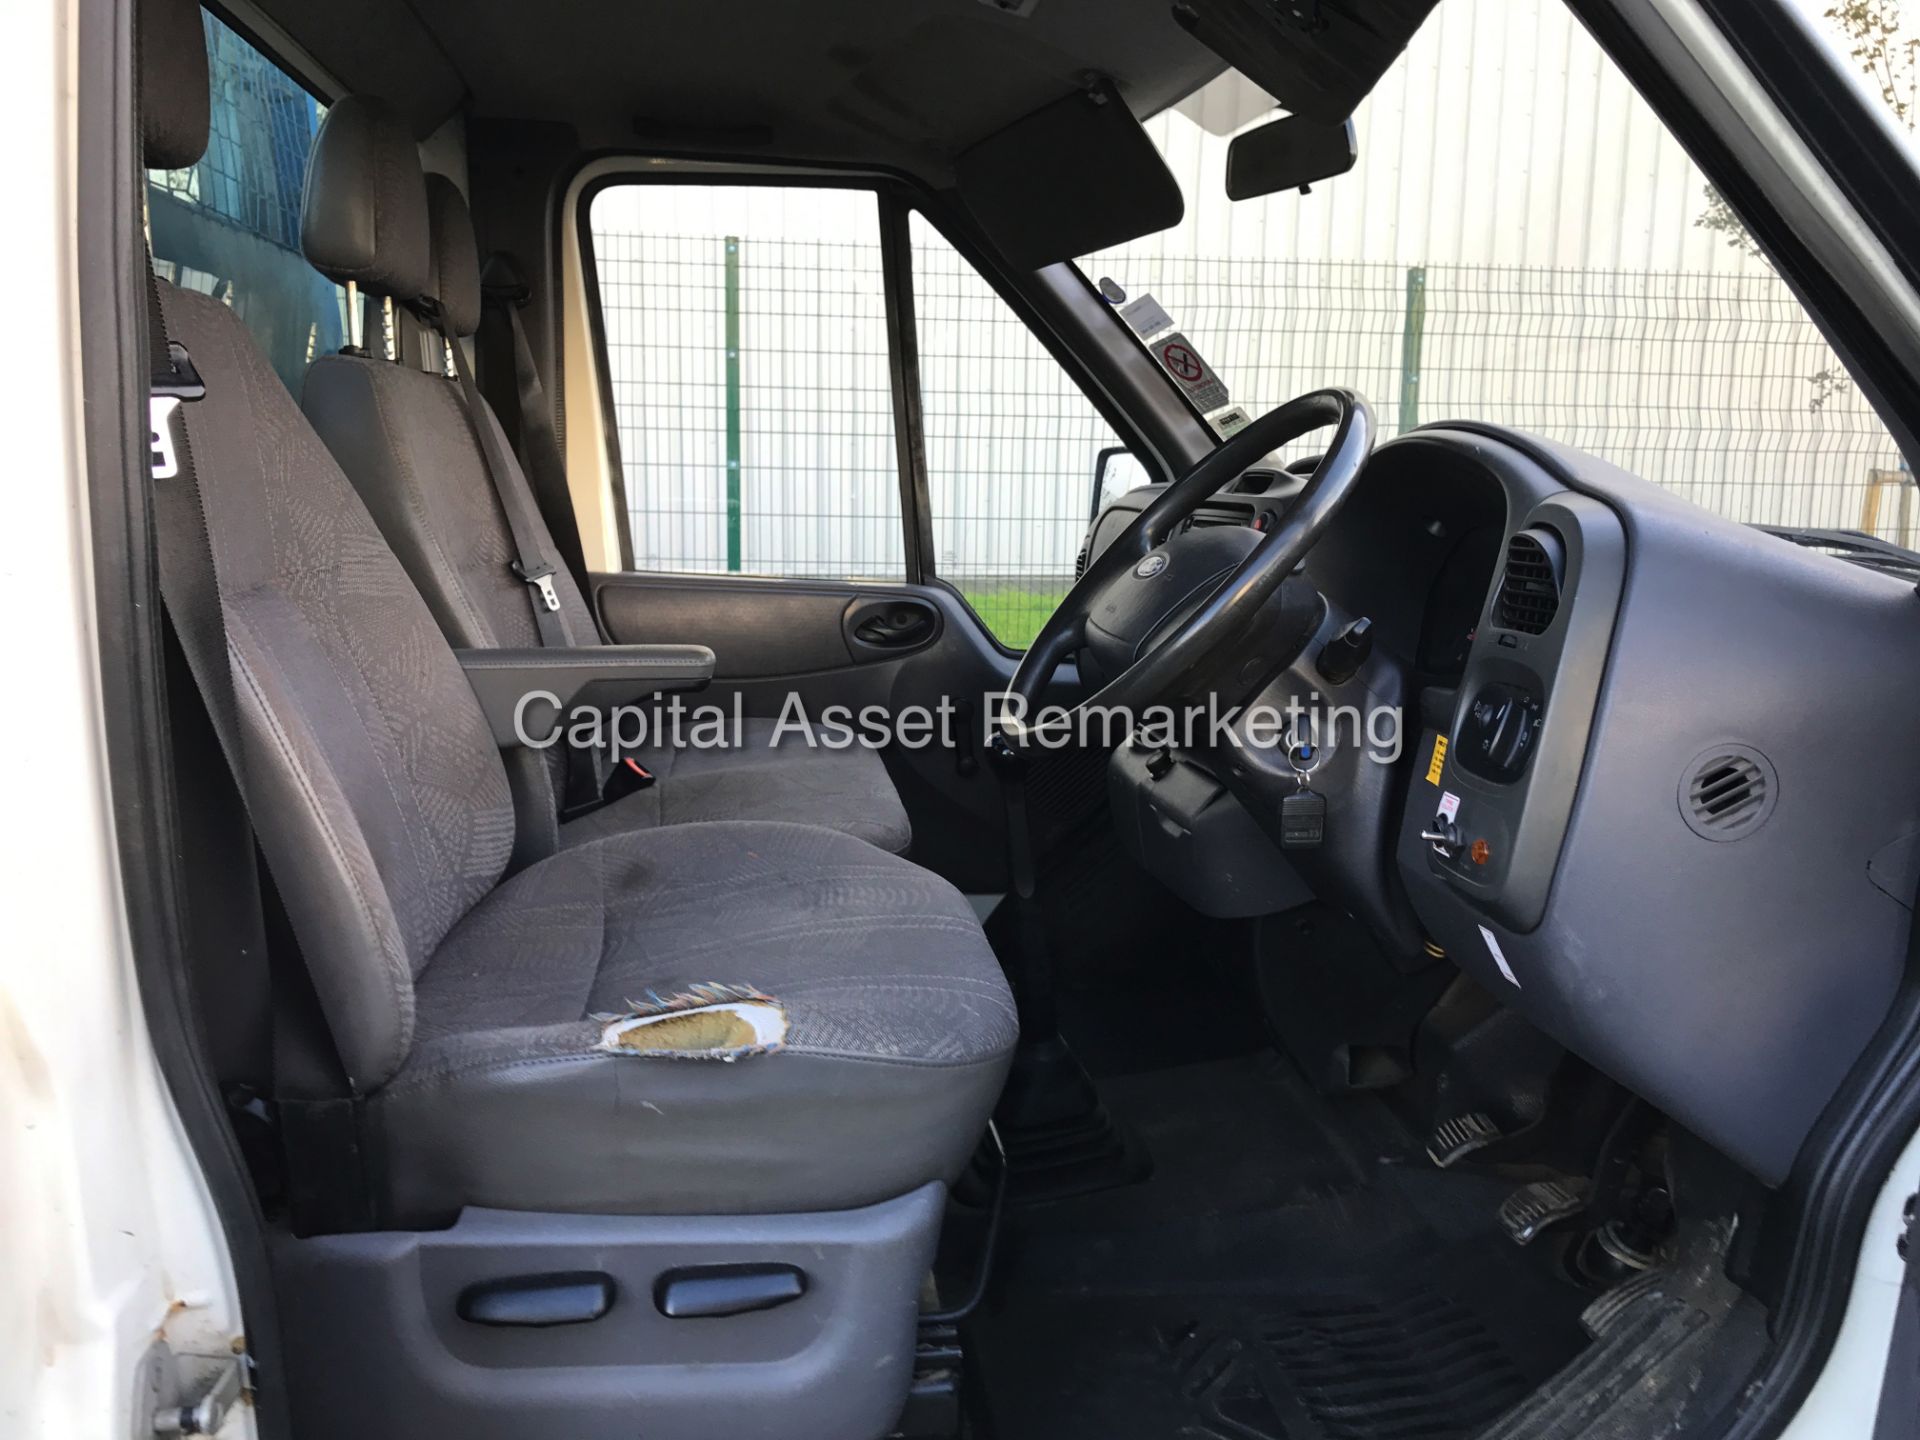 ON SALE FORD TRANSIT 2.4TDCI "TWIN WHEEL TIPPER" (2006 YEAR)ONLY 89K MILES GENUINE -VERY SOLID BODY - Image 10 of 15